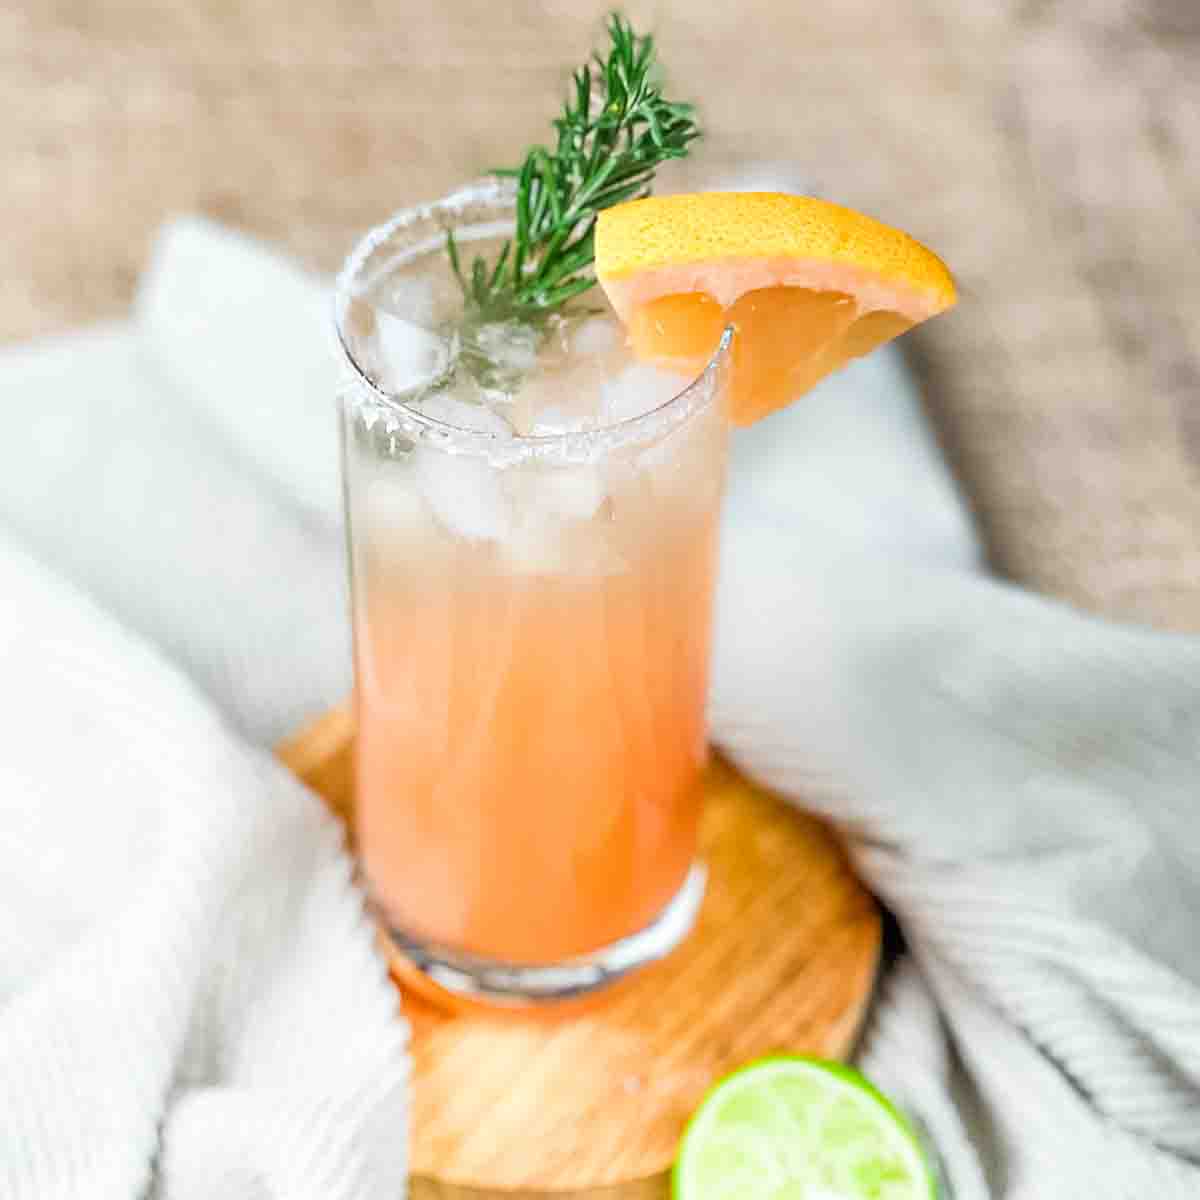 Non alcoholic grapefruit paloma in a tall glass, garnished with a grapefruit wedge and fresh rosemary.